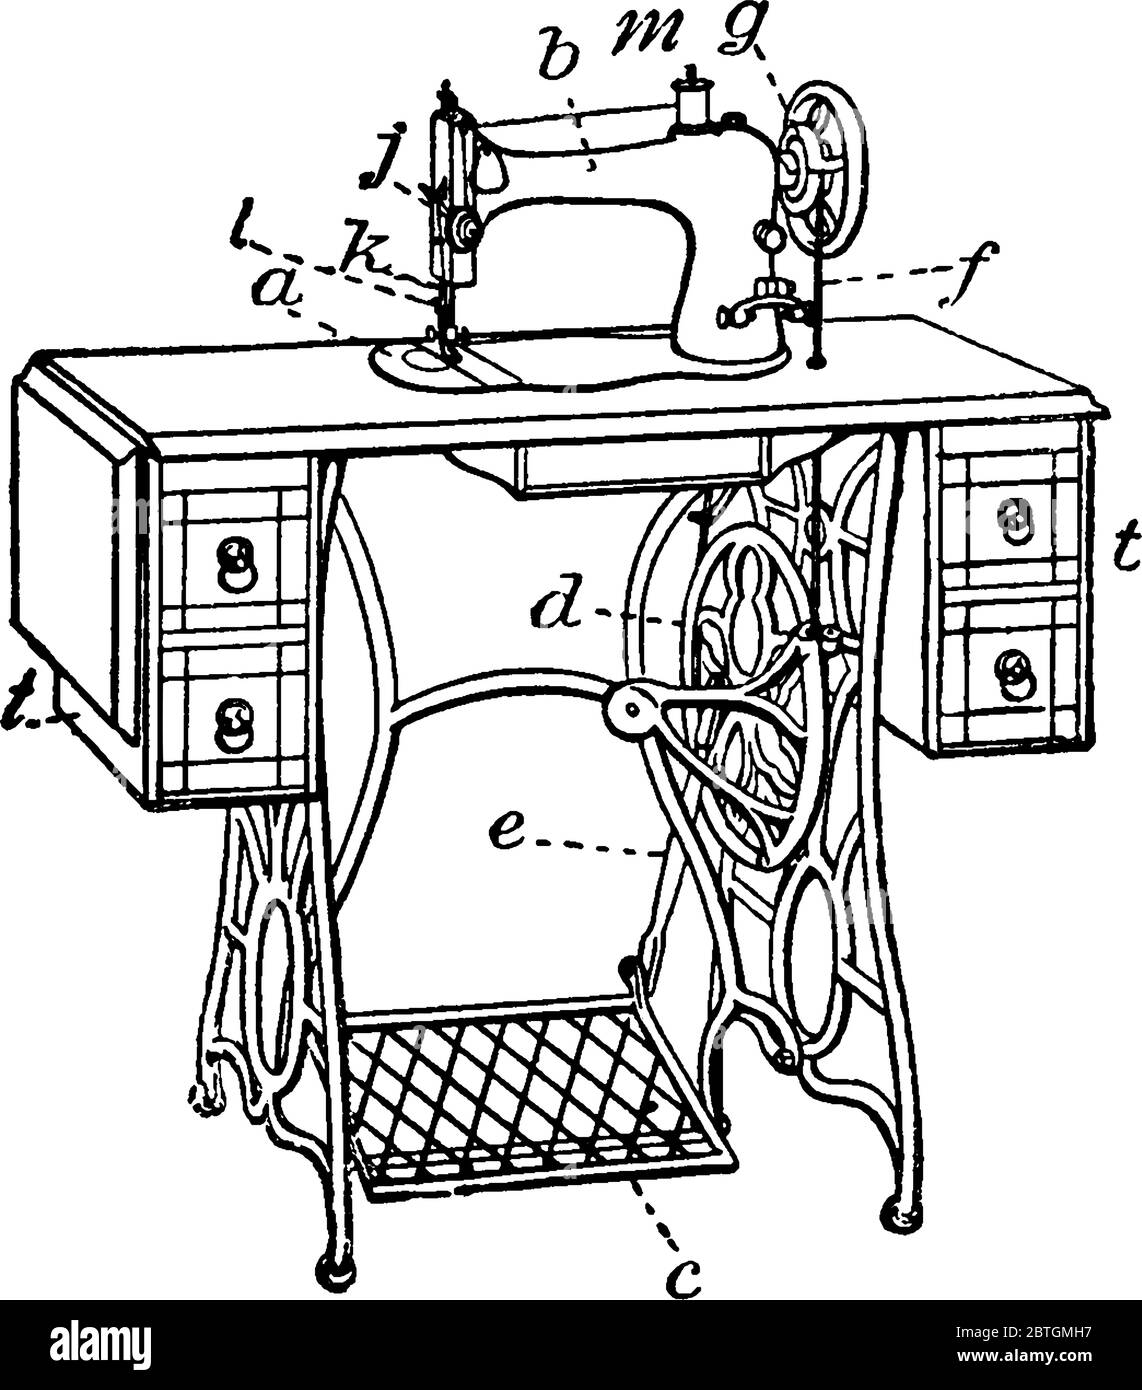 Identification Parts Of Sewing Machine / Basic Parts Of Sewing